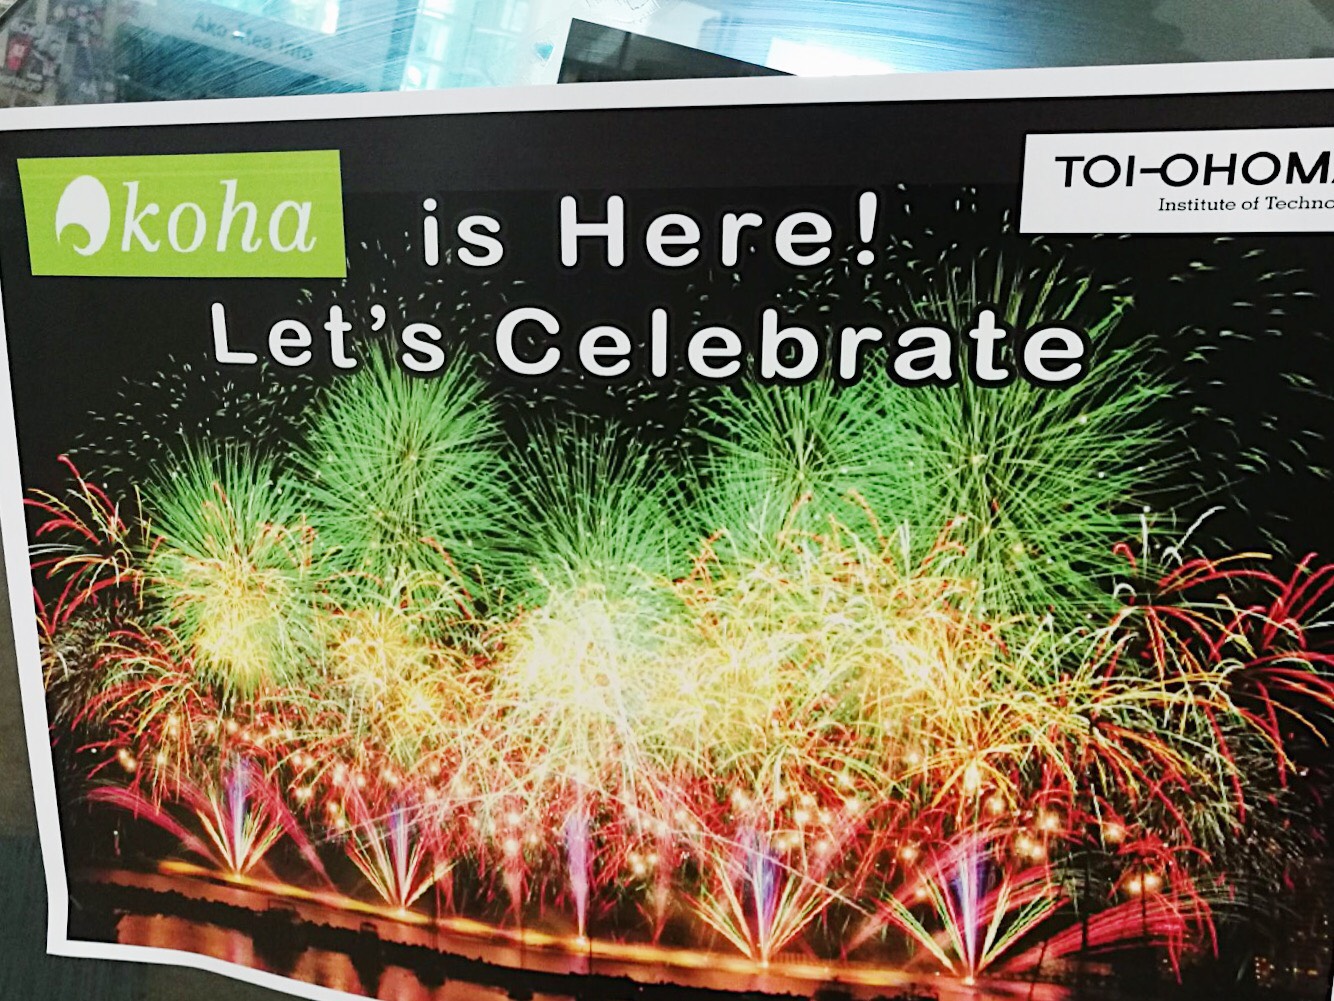 photo of a poster with fireworks in red, green and blue, with 'Koha is here! let's celebrate' text